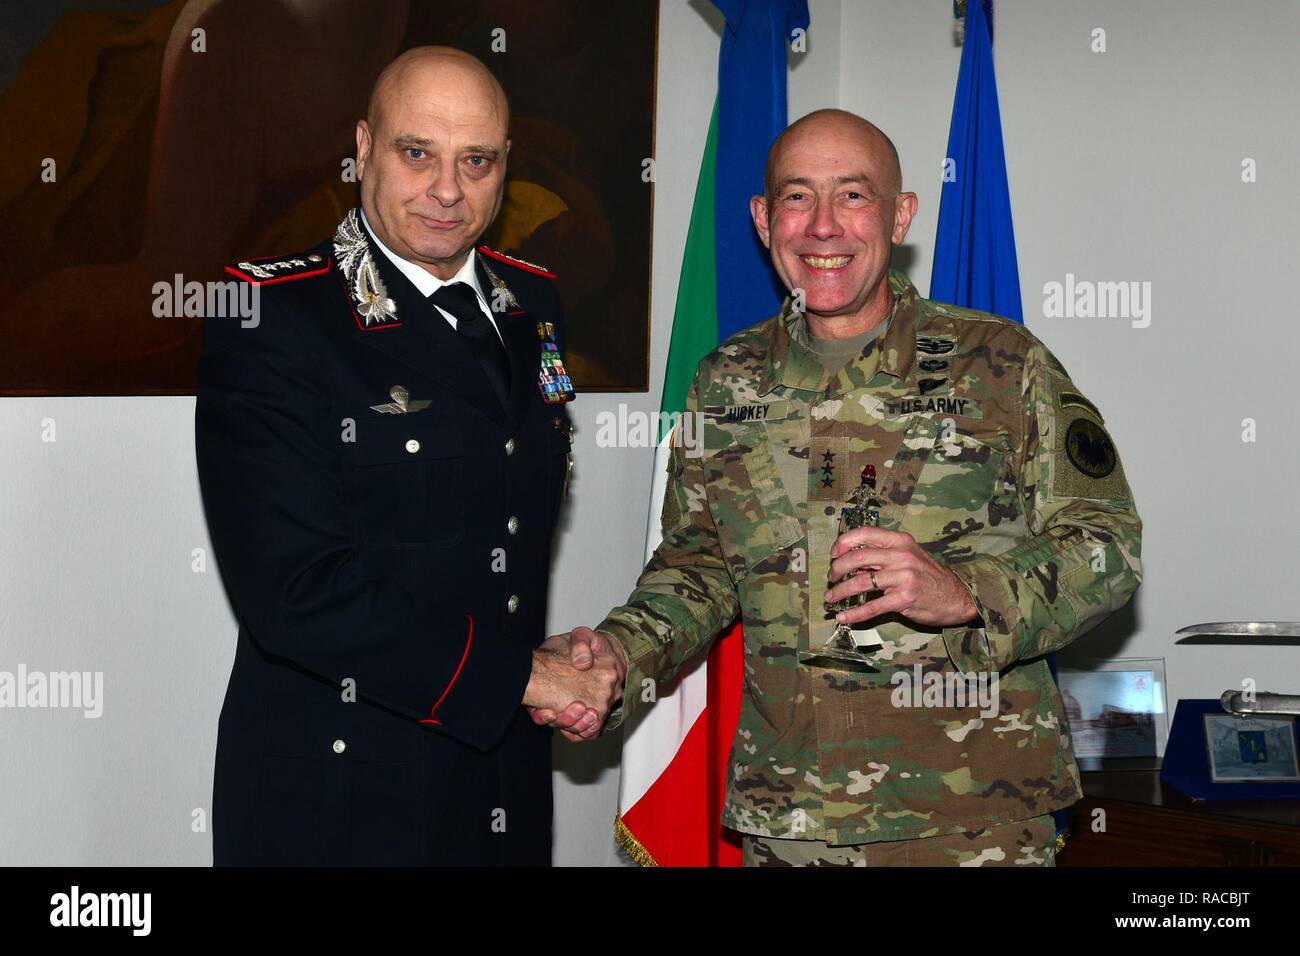 Lt. Gen Vincenzo Coppola (left), Commanding General “Palidoro” Carabinieri Specialized and Mobile Units, presents a gift at Lt. Gen. Charles D. Luckey (right), Commanding General U.S. Army Reserve Command, during visit at Center of Excellence for Stability Police Units (CoESPU) Vicenza, Italy, January 20, 2017. Stock Photo